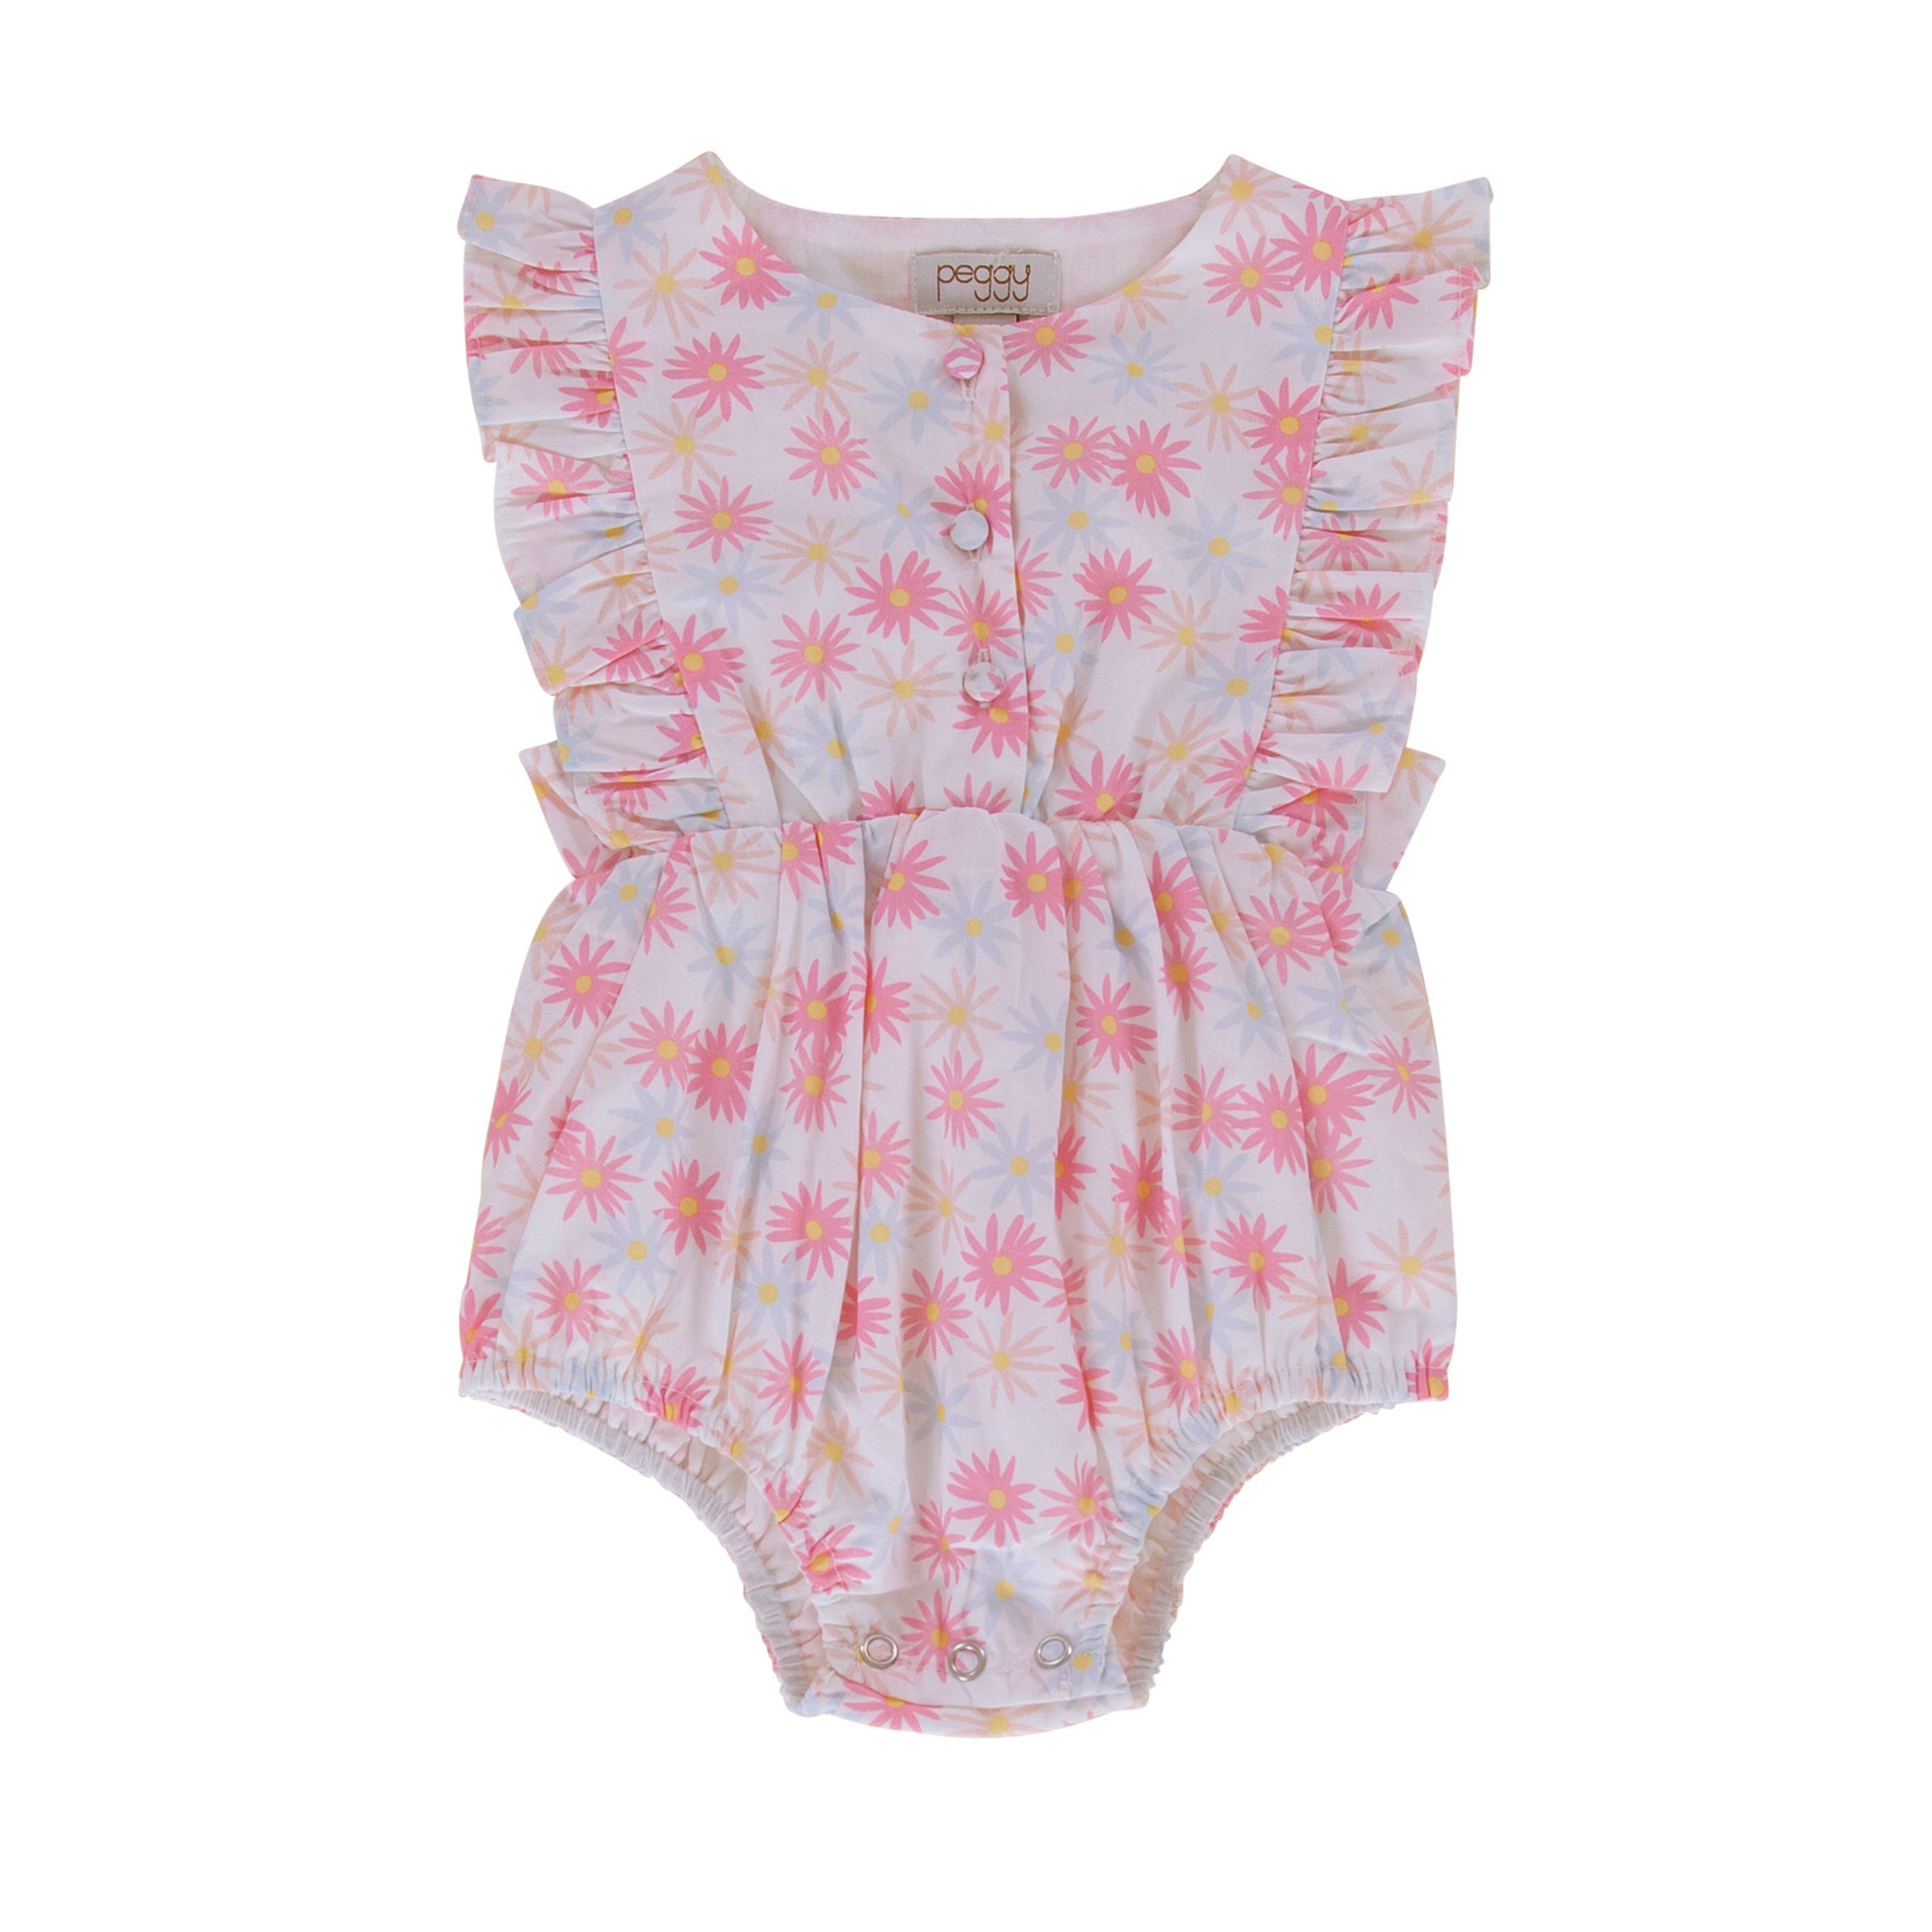 Peggy - August Playsuit (Betsy Daisy Floral)